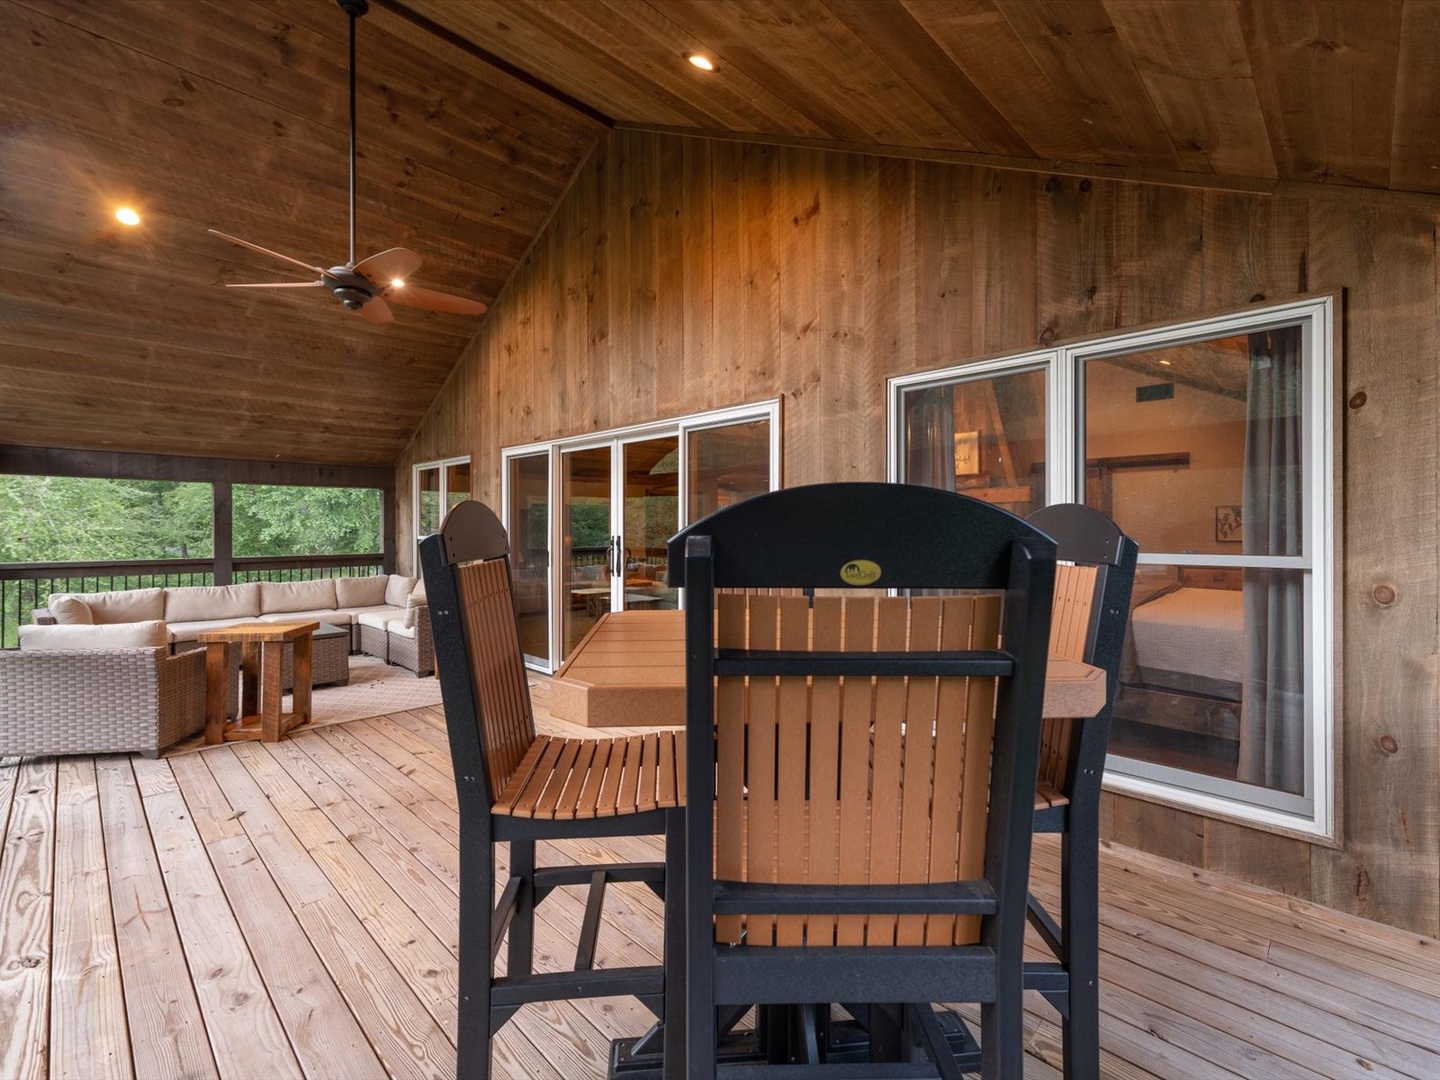 The River House- Upper level deck seating